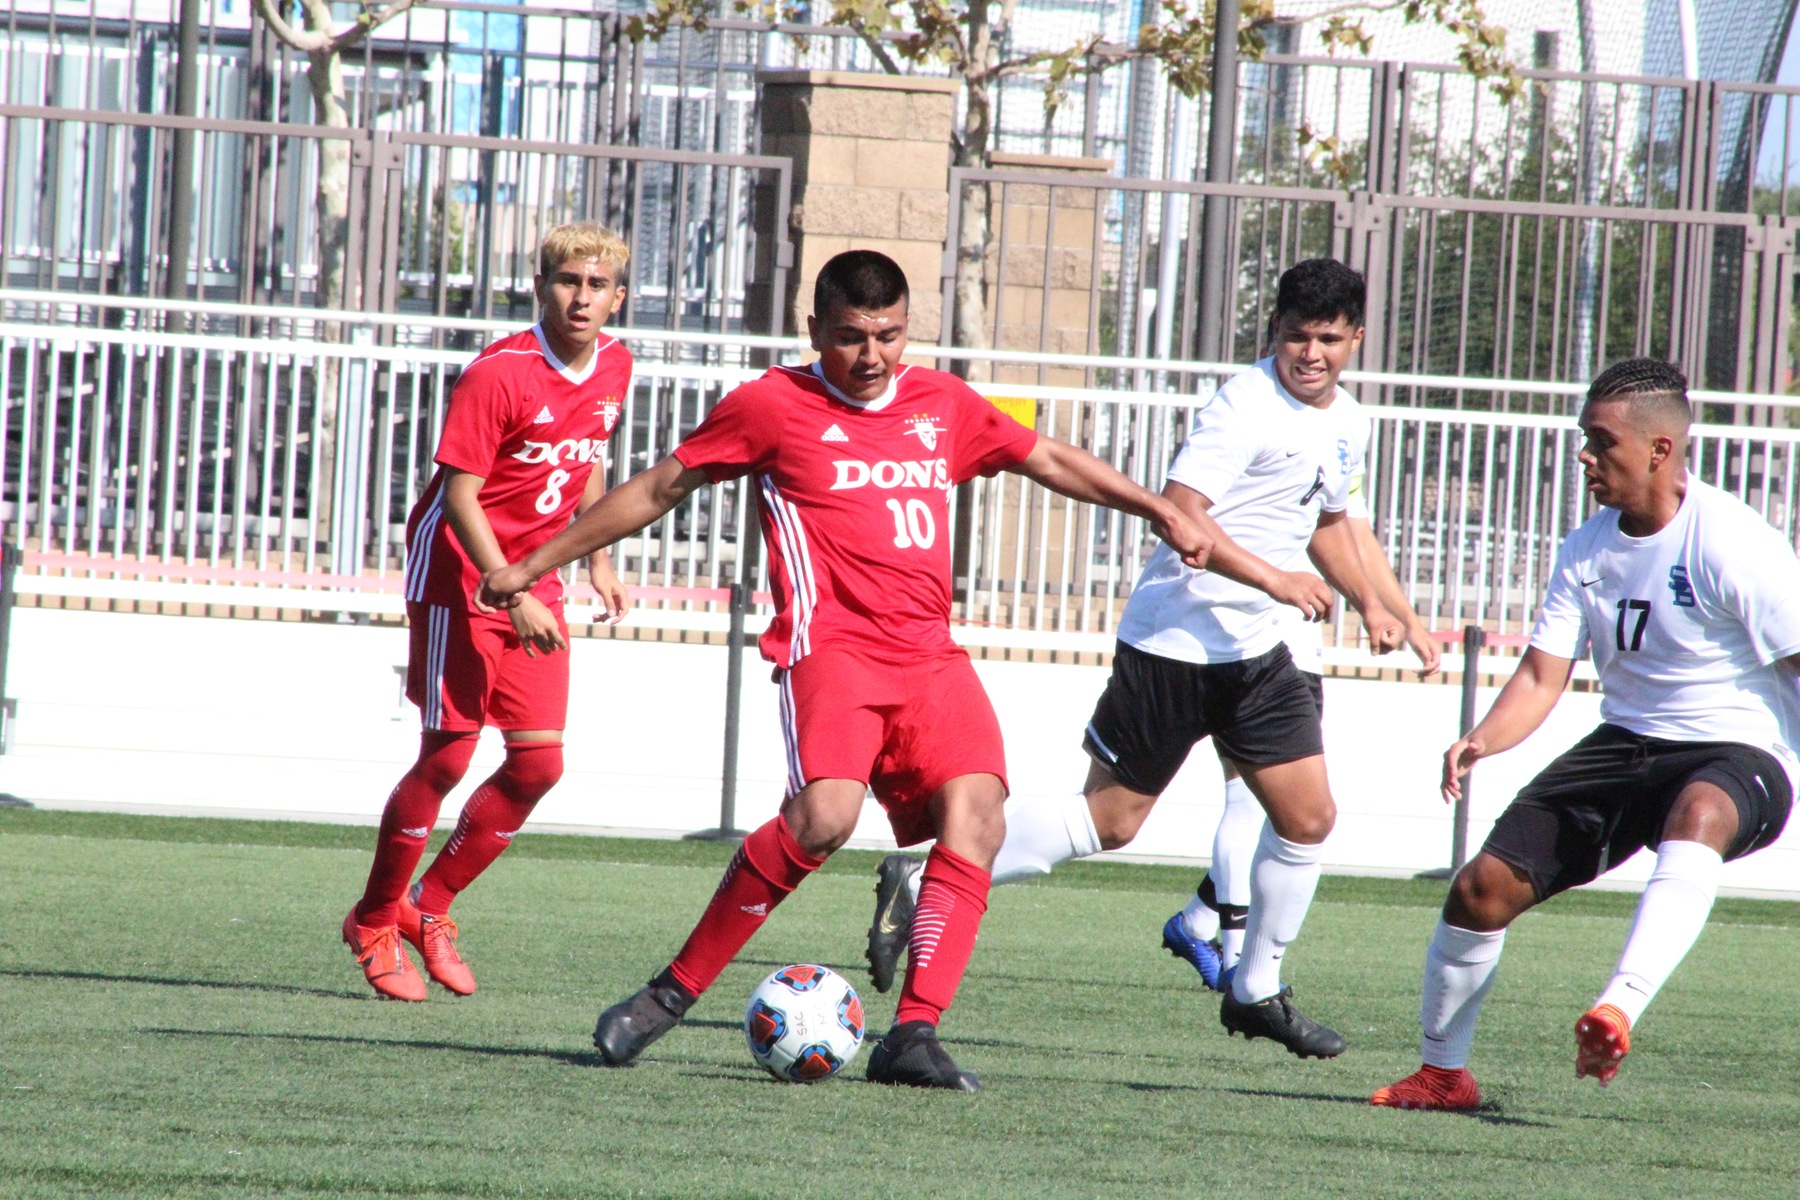 Garcia Scores Late to Lift Dons to 2-0 Win Against SBVC